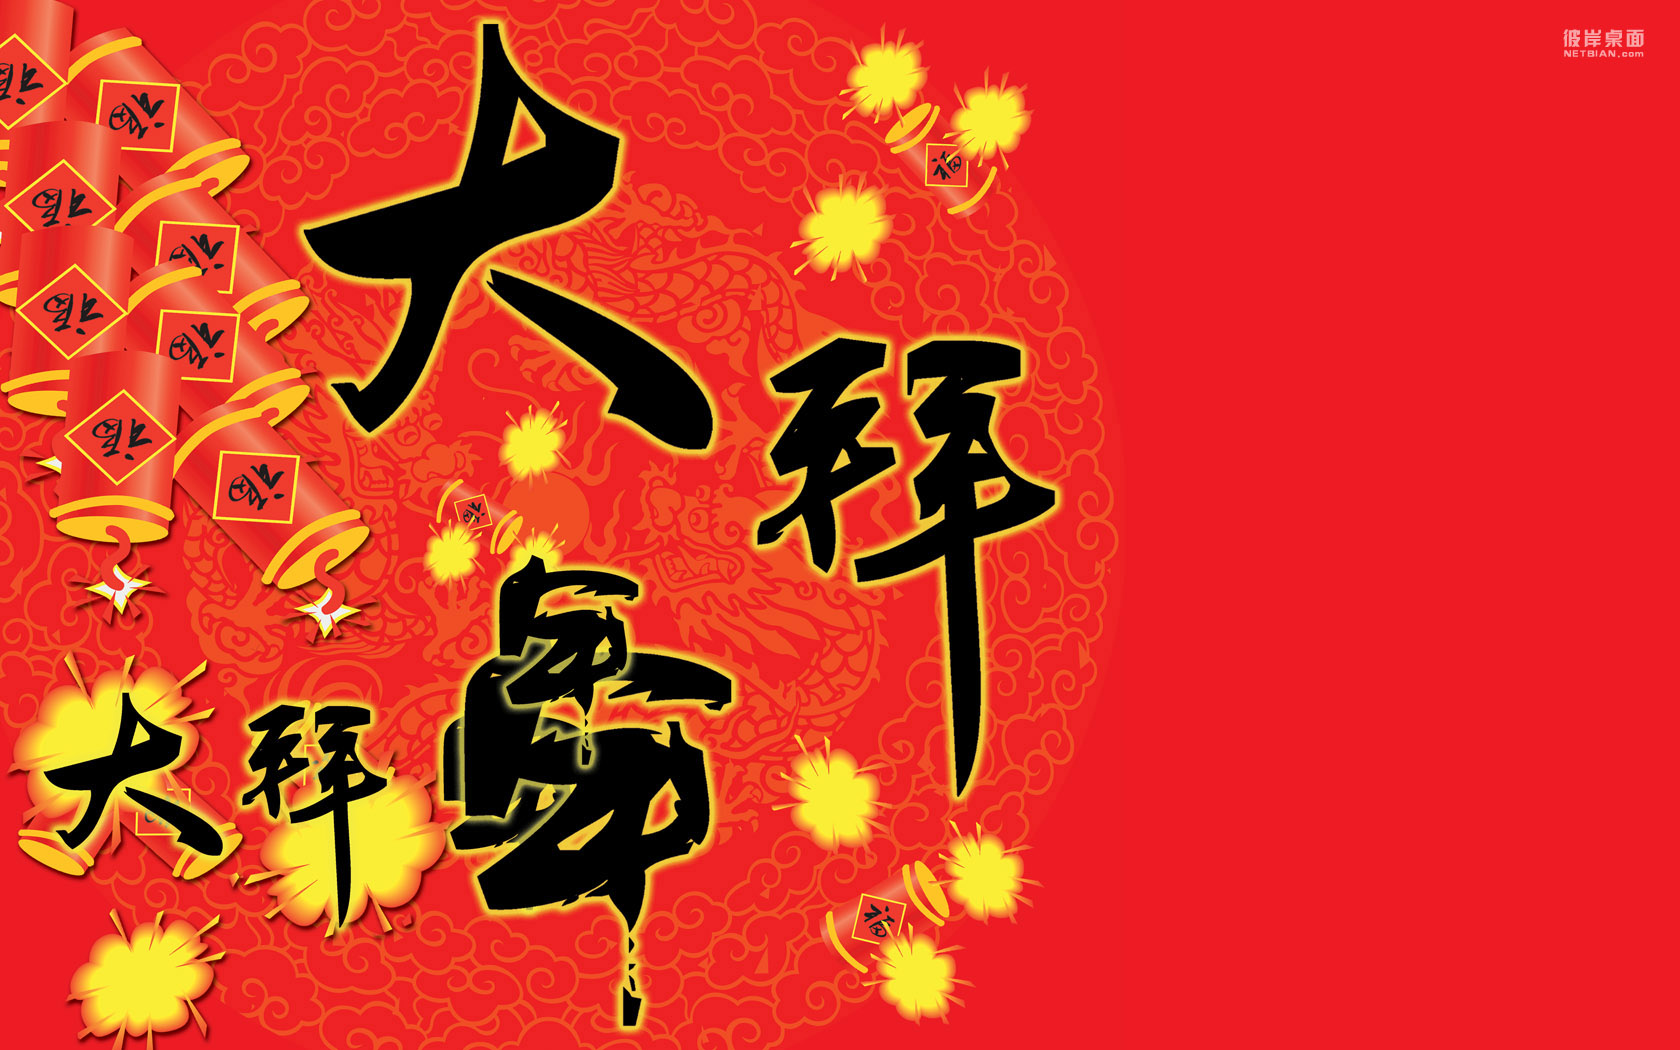 Chinese New Year greetings wallpaper for the Year of the Rabbit